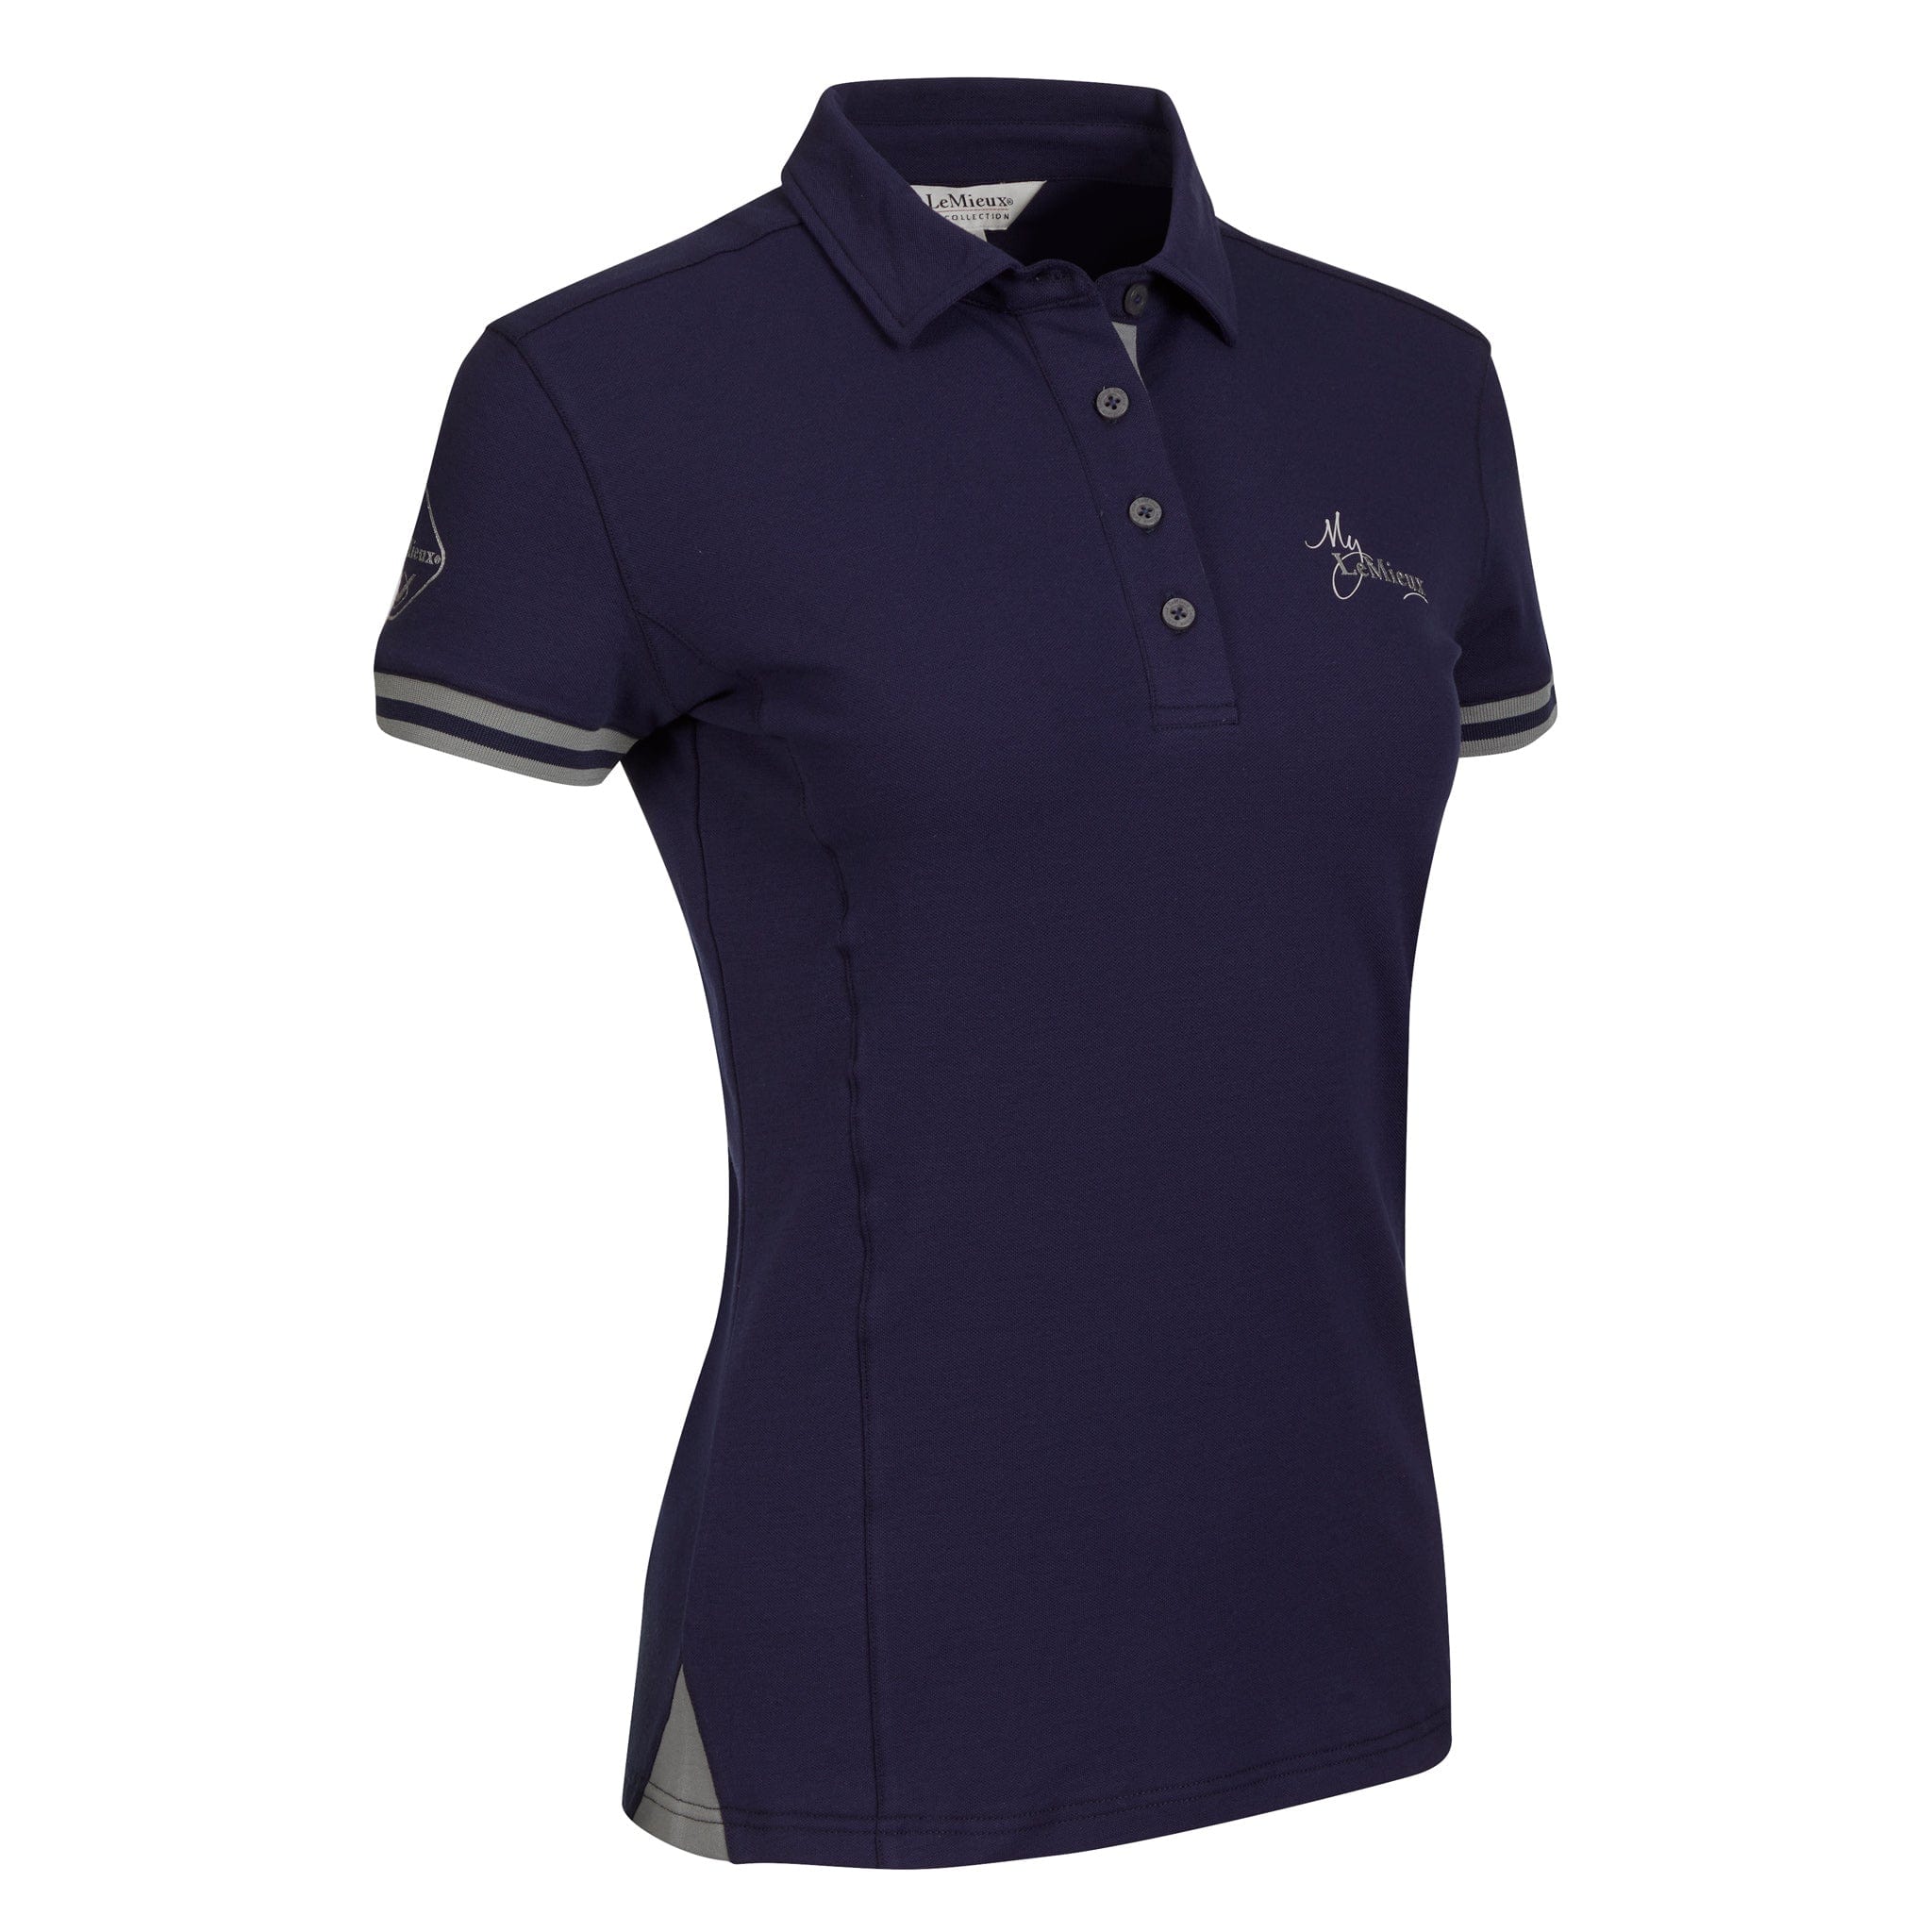 LeMieux Polo Shirt Navy and Grey 4904 Front Right View